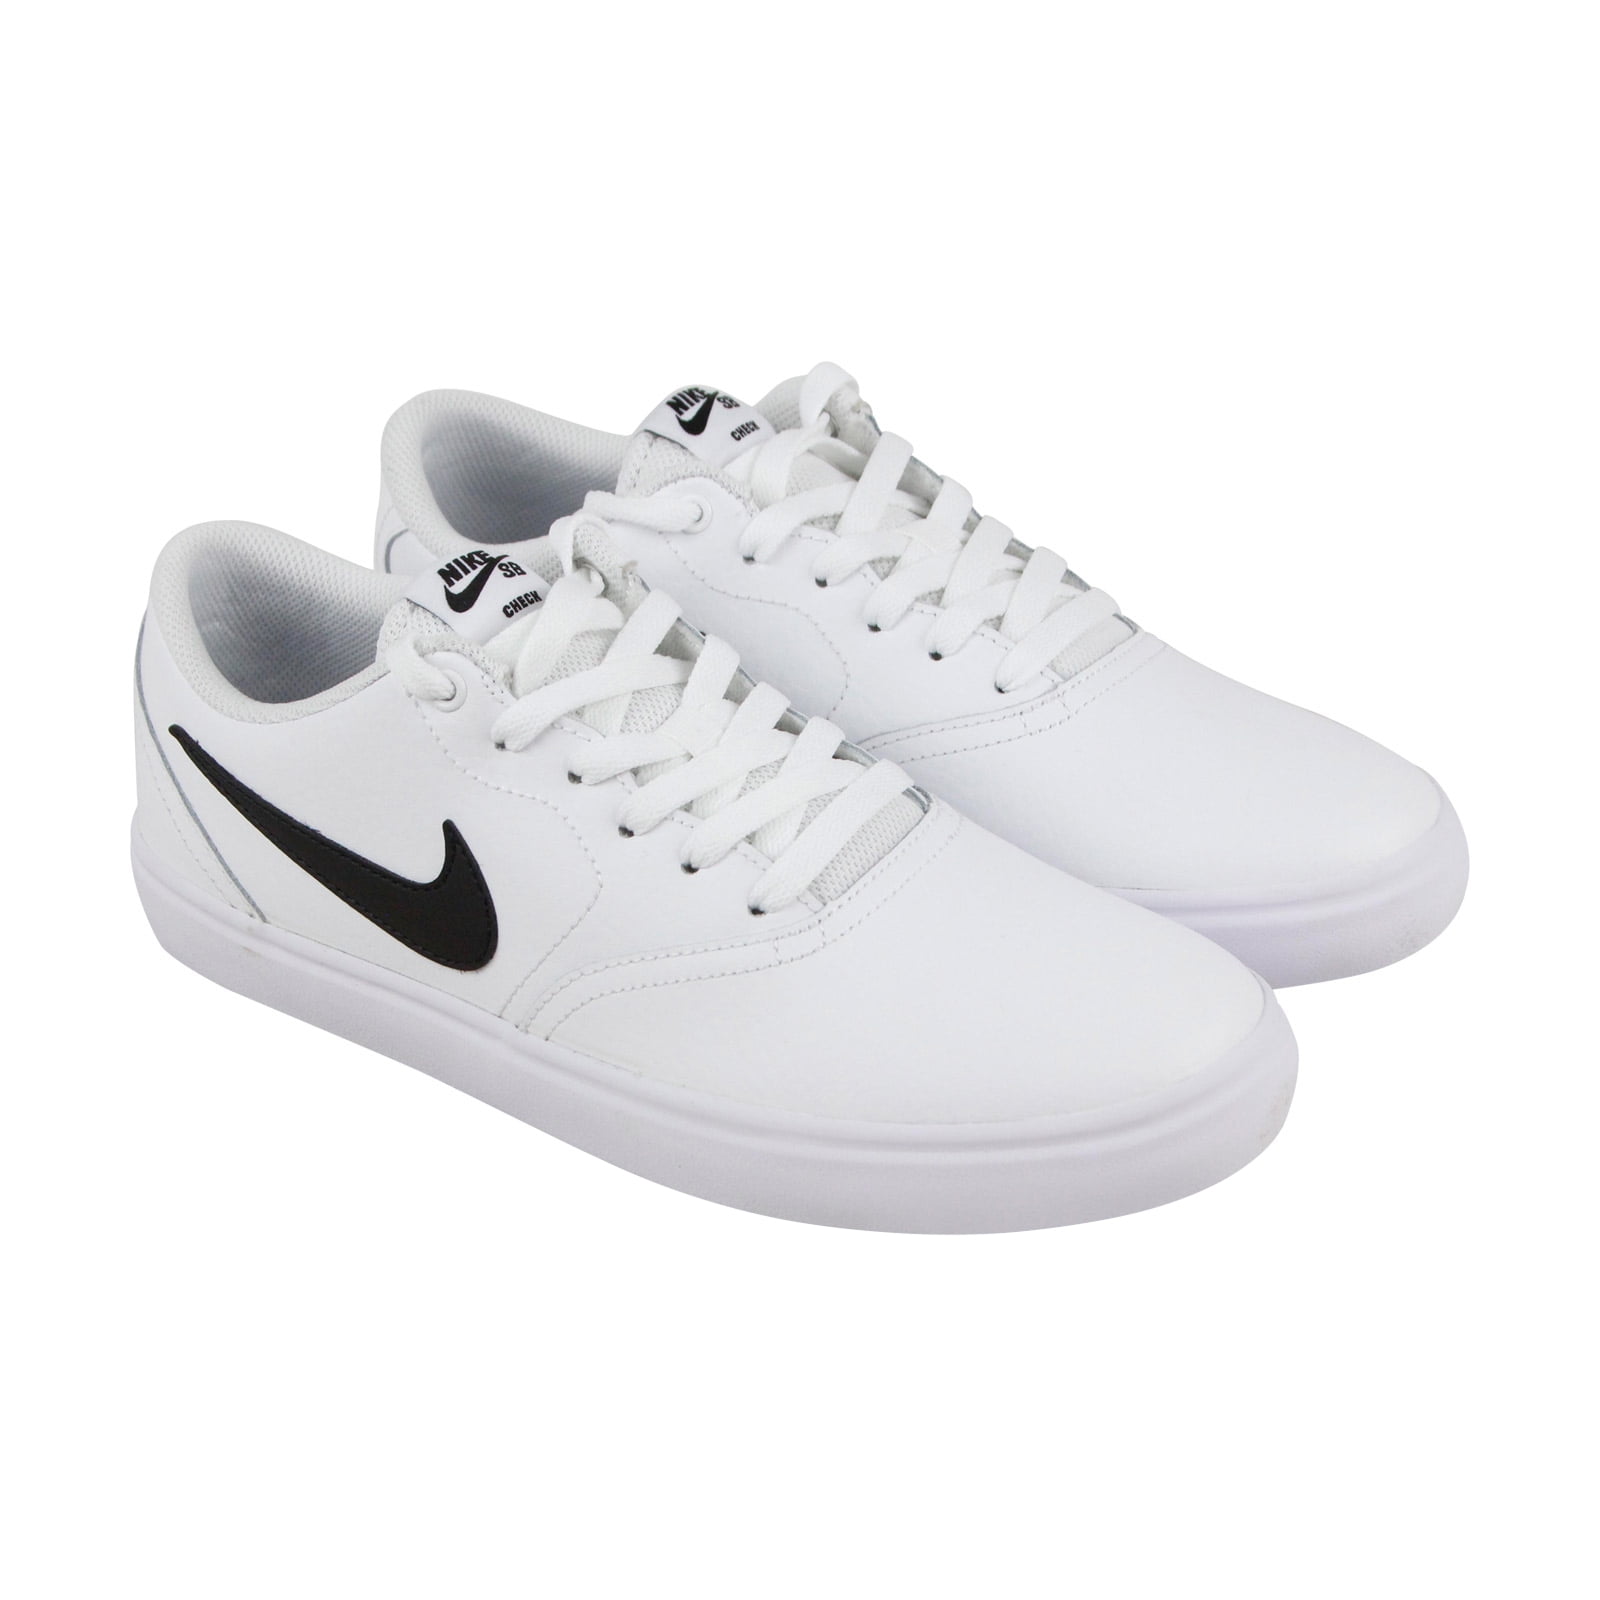 Nike Check Solar Mens White Leather Lace Up Skate Shoes - Walmart.com